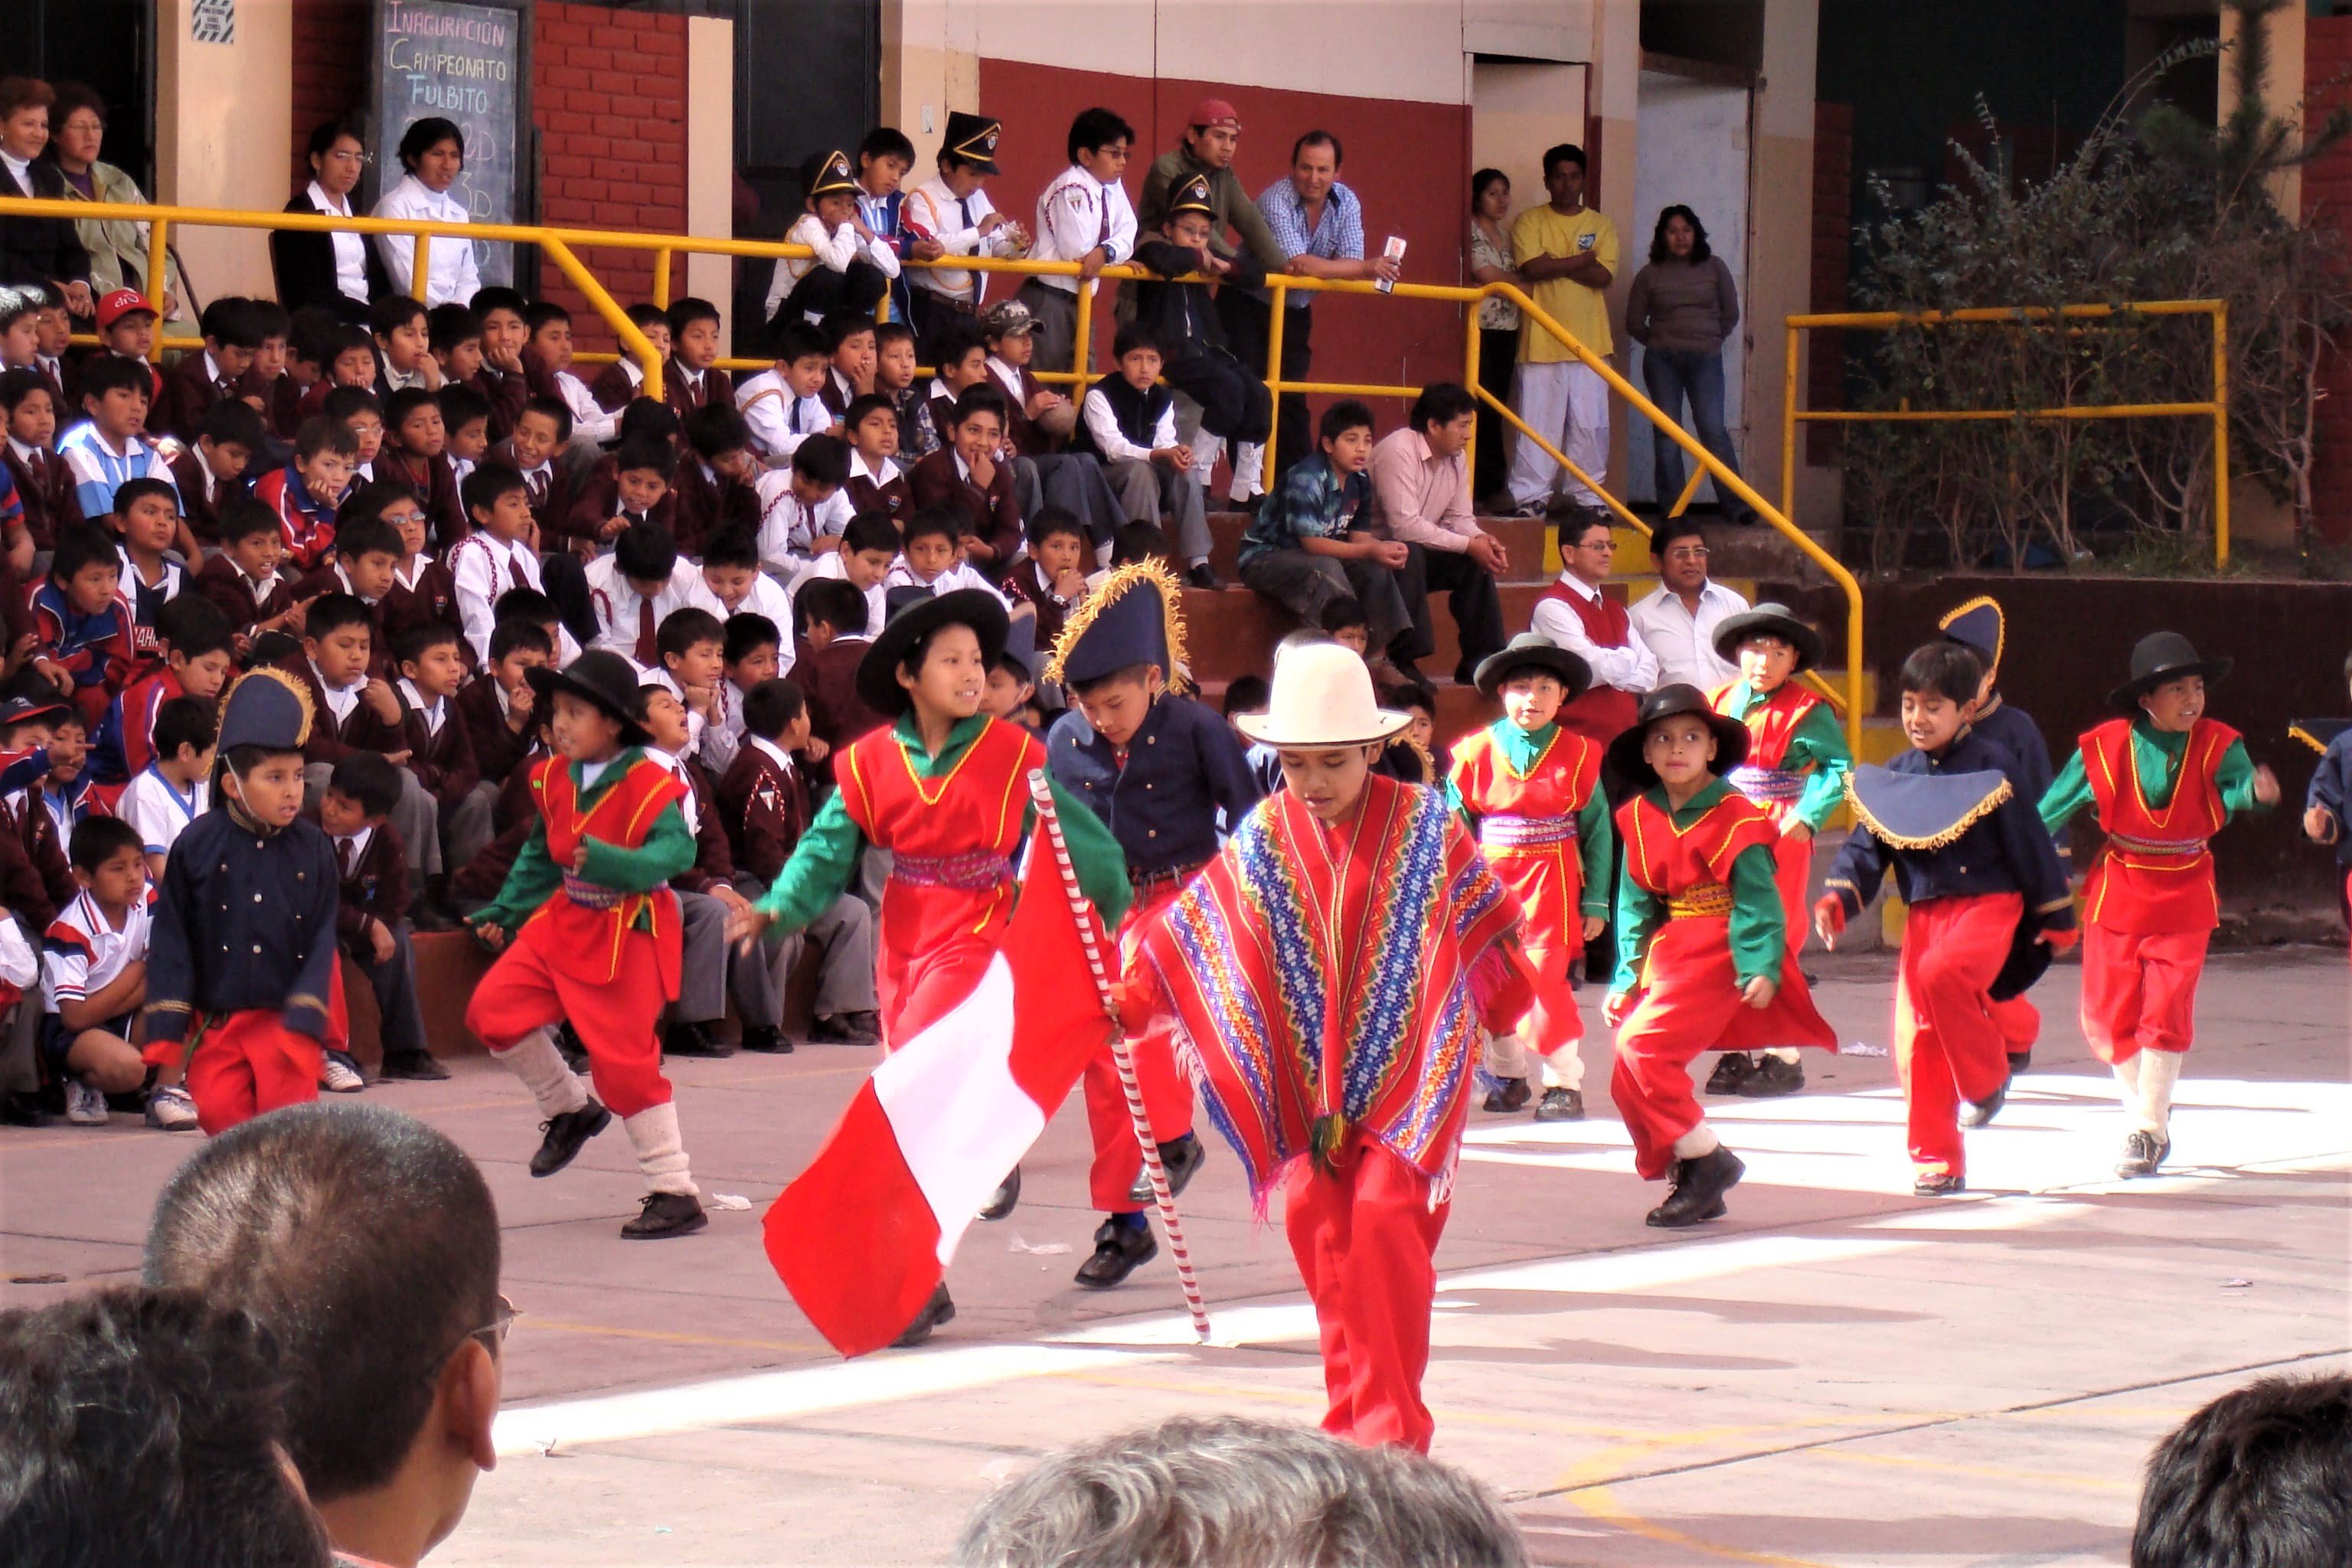 JSED_Service-Learning Trips_Peru_Local festivities